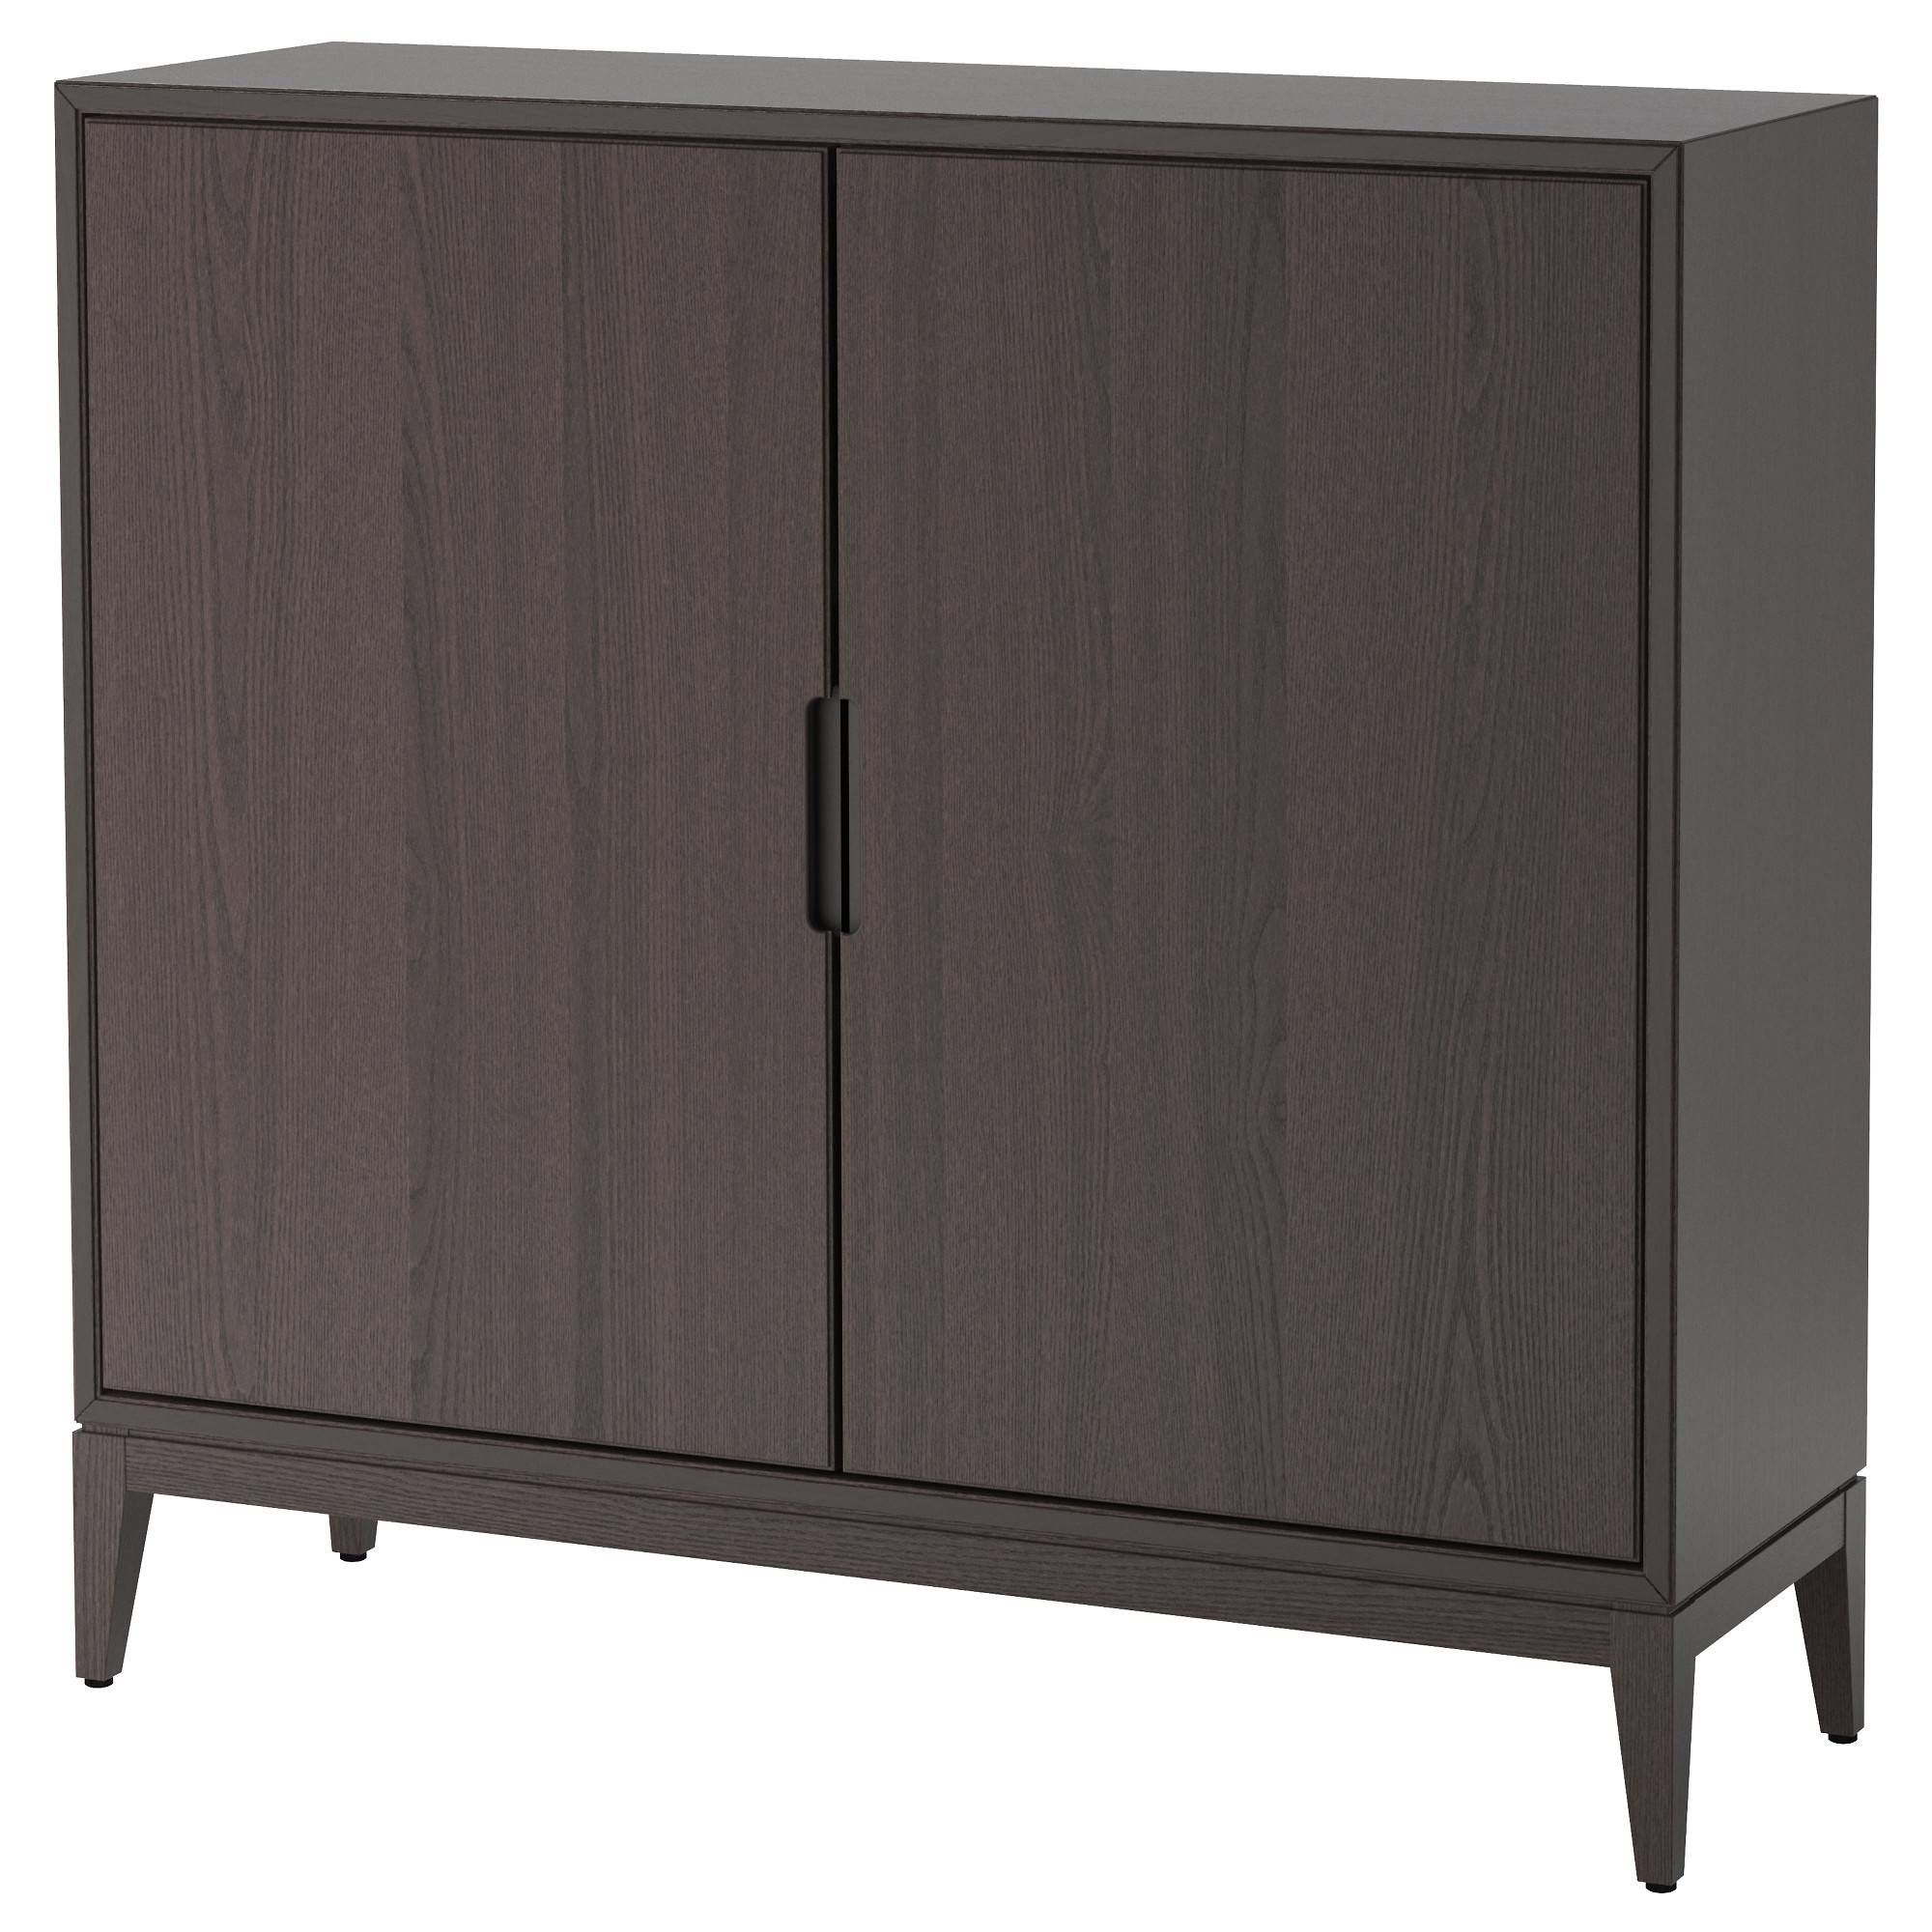 Cabinets & Sideboards – Ikea For Best And Newest Cheap Sideboards Cabinets (View 14 of 15)